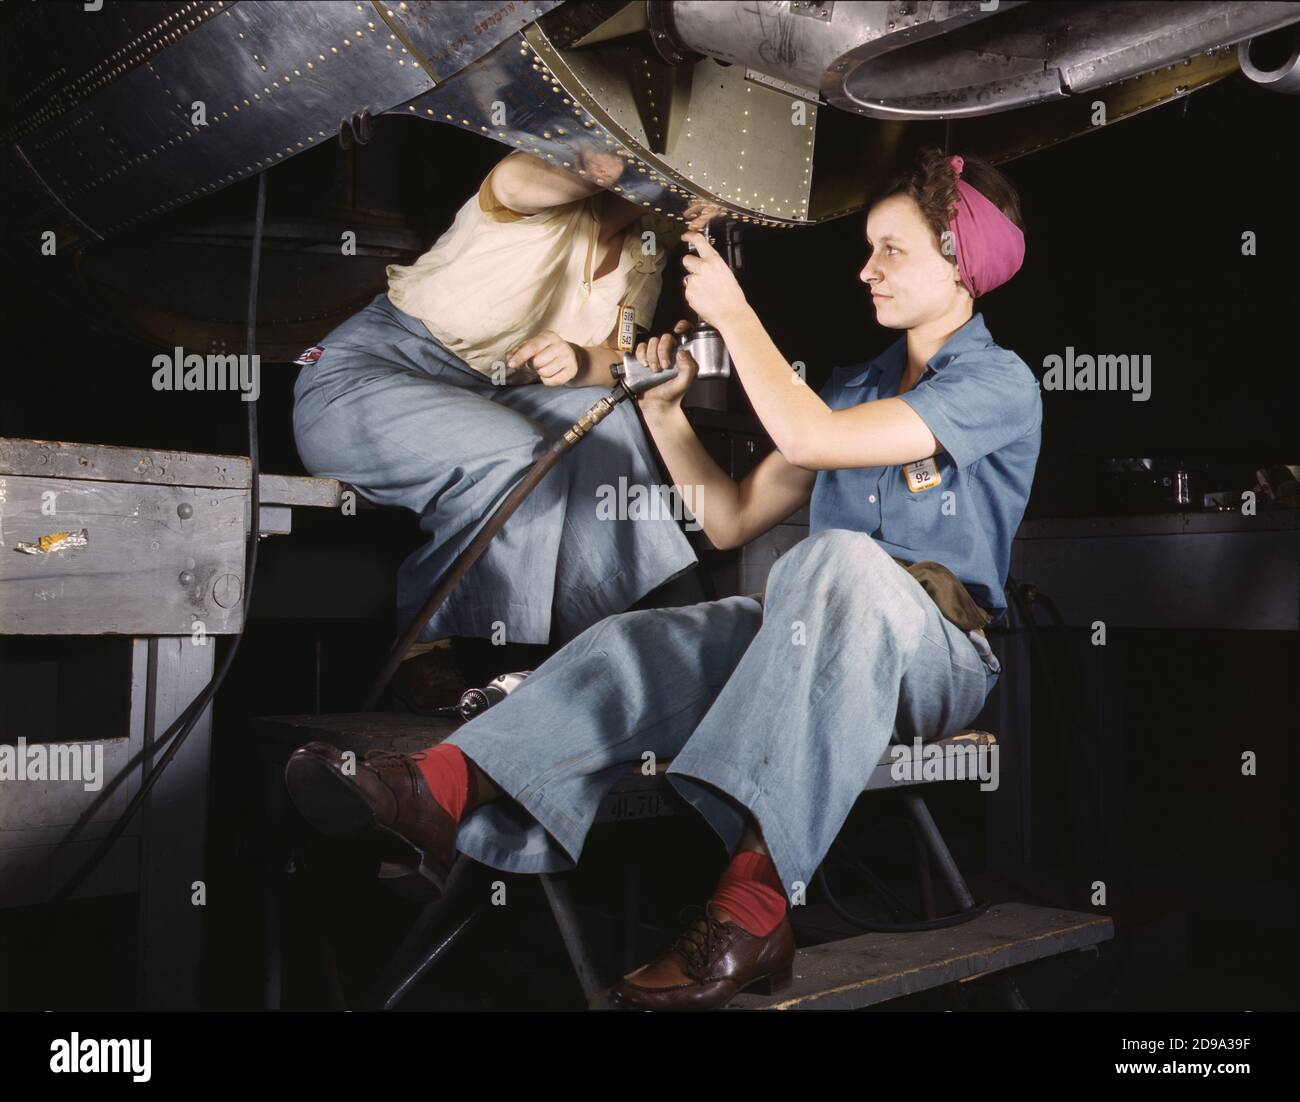 1942 , october , Long Beach, California , USA : Women at work on bomber,  Douglas Aircraft Company . Photo by Alfred T. Palmer for Farm Security Administration - Office of War Information . - WWII - WORLD WAR 2nd- SECONDA GUERRA MONDIALE - WW2nd - WW2 - foto storiche - foto storica  - USA - HISTORY PHOTOS - FABBRICA AVIAZIONE - BOMBARDIERE - AEREO - PLANE - AIRPLANE - AVIATION  - AIR FORCE  - AVIAZIONE - AIRPLANES - PLANES - AEROPLANI - AEROPLANO - AVIAZIONE - STOCK - ANNI QUARANTA - 40's - '40 - CLASSE OPERAIA - operaie - WORKING CLASS - workers - factory - fabbrica - INDUSTRIA - INDUSTRY - s Stock Photo